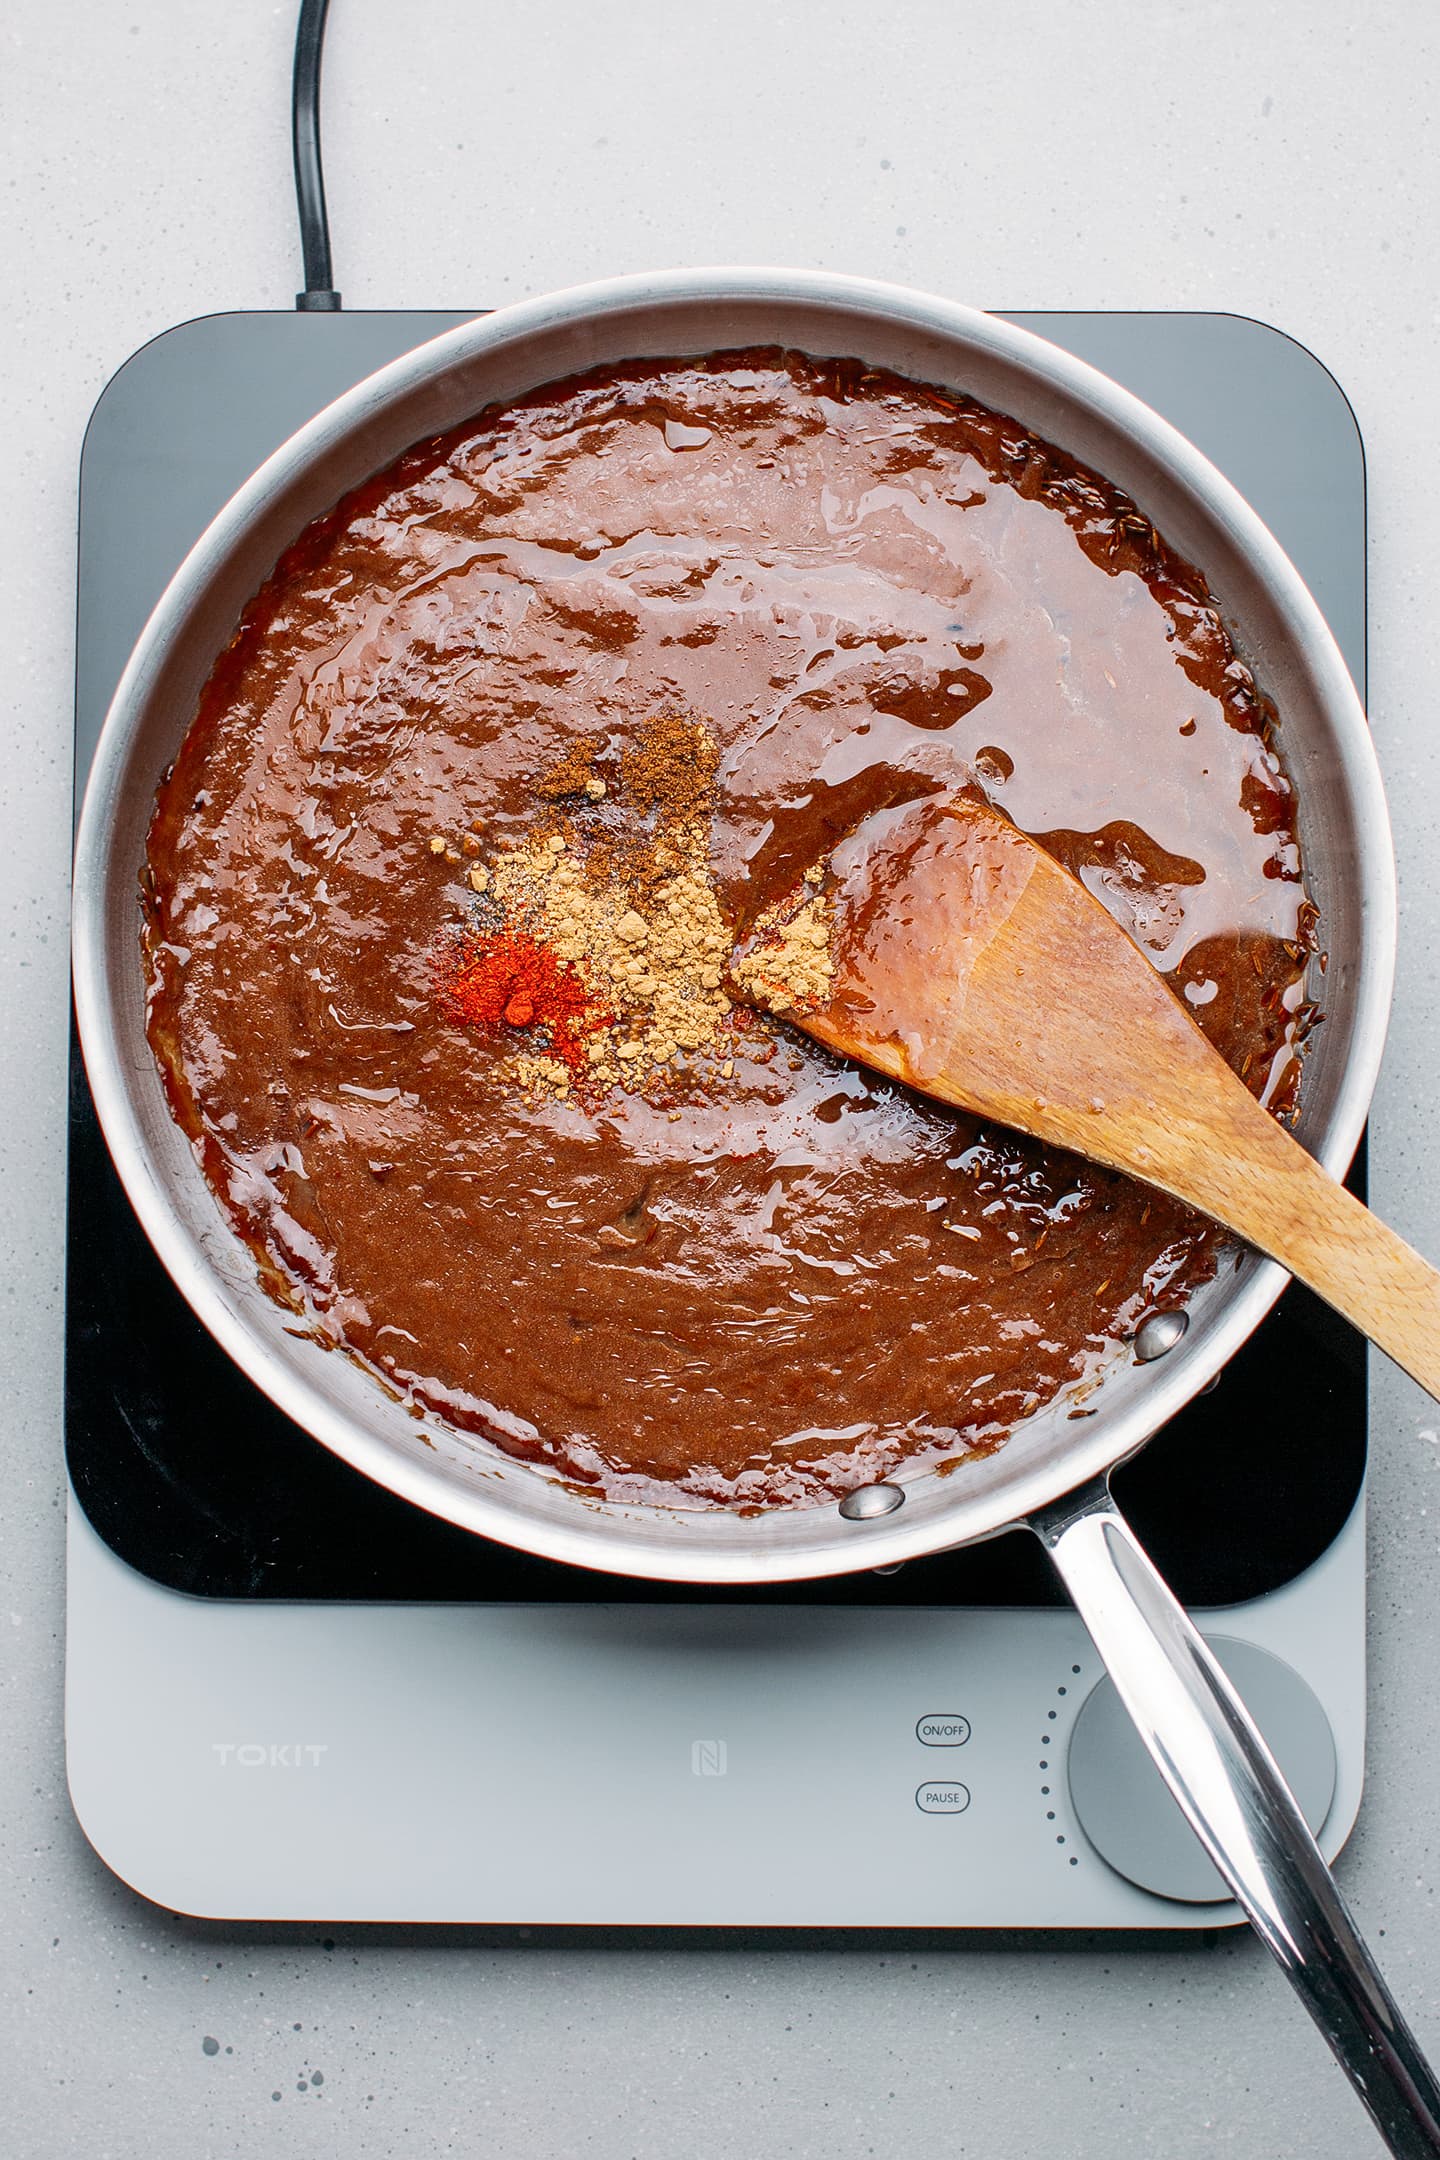 Tamarind sauce and spices in a skillet.